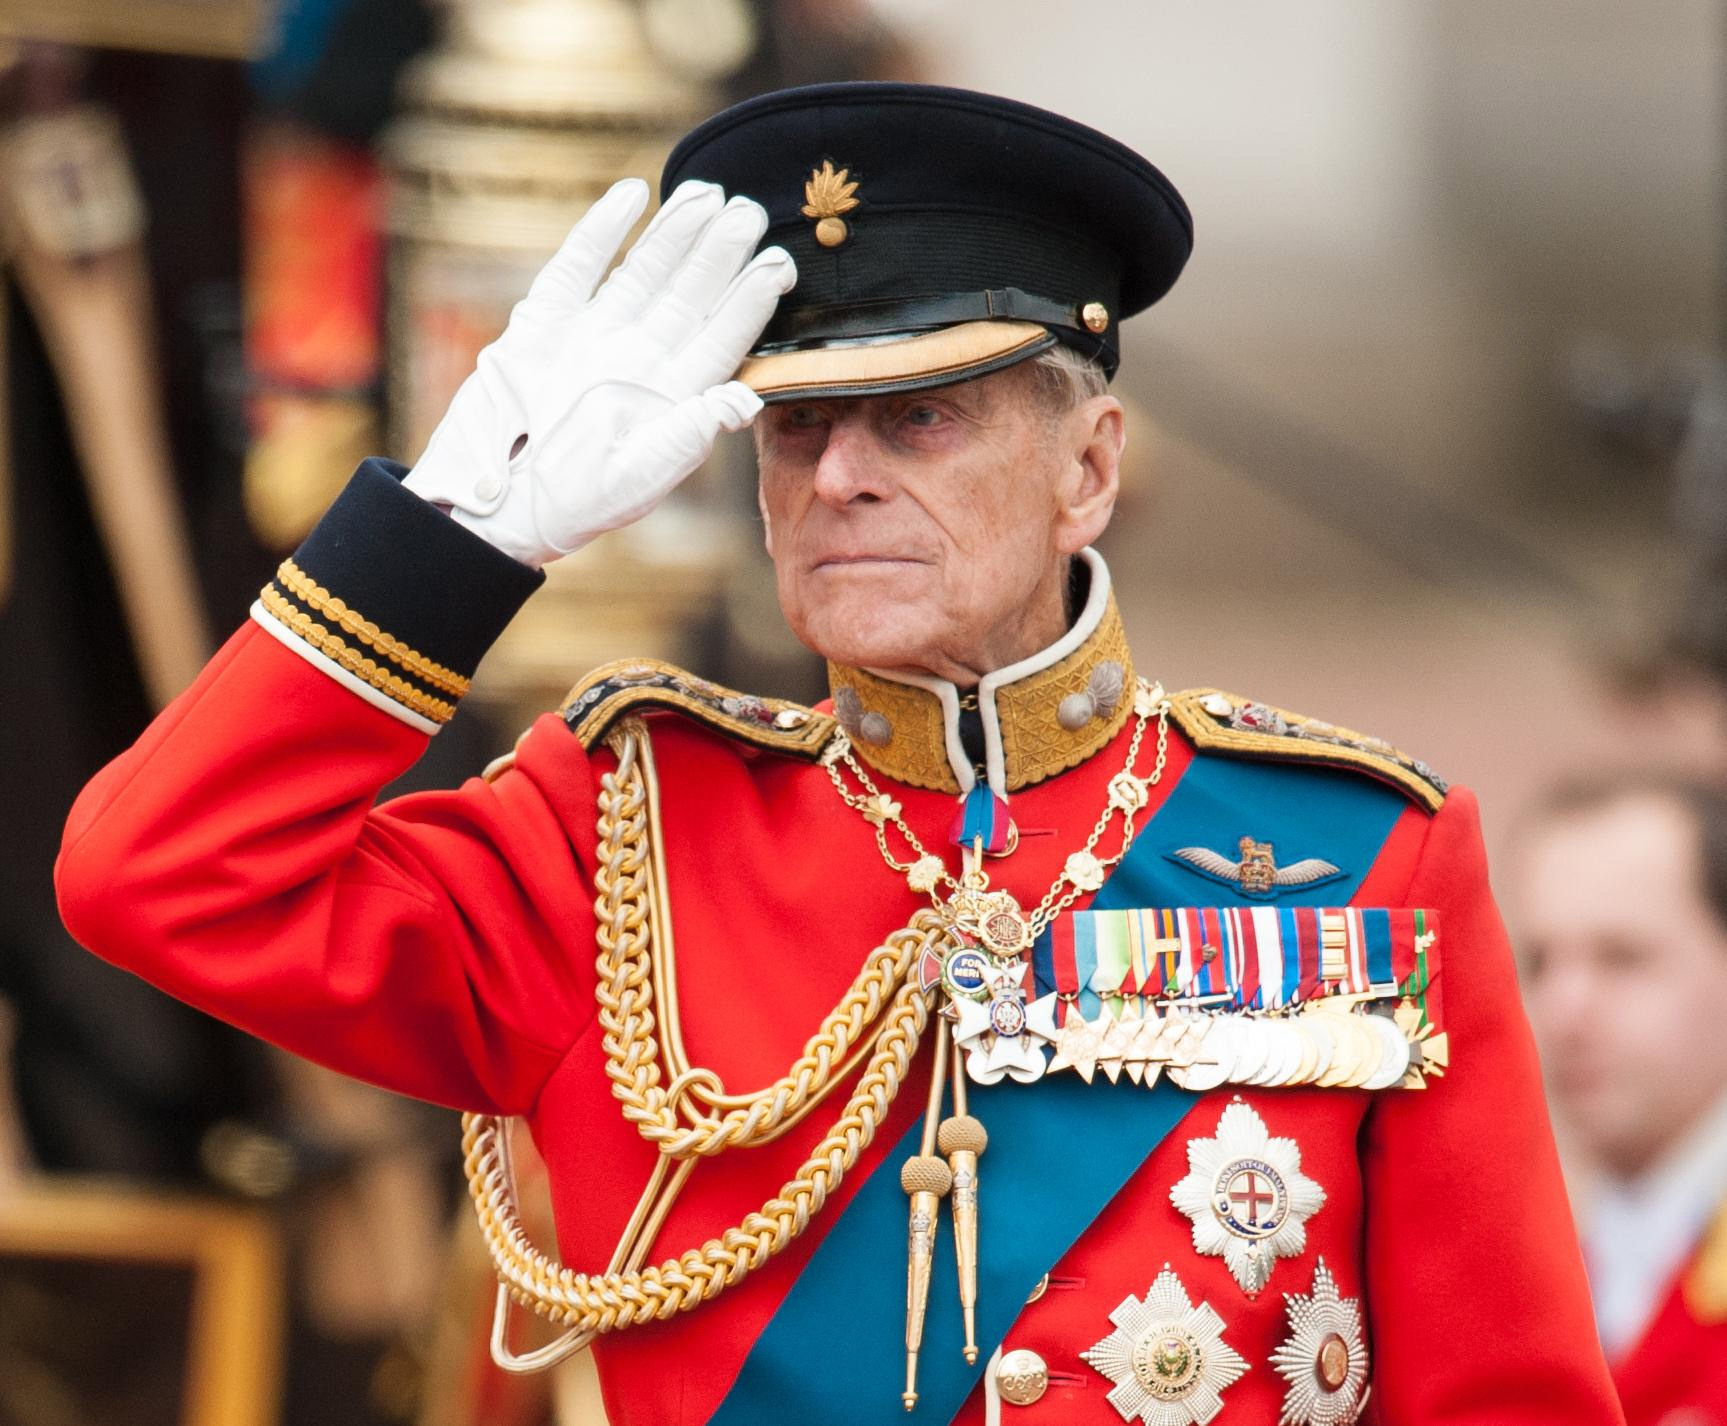 The Duke of Edinburgh inspecting troops outside Buckingham Palace during the annual Trooping the Colour parade, in central London in August 2017 (Lipinski/PA Wire)